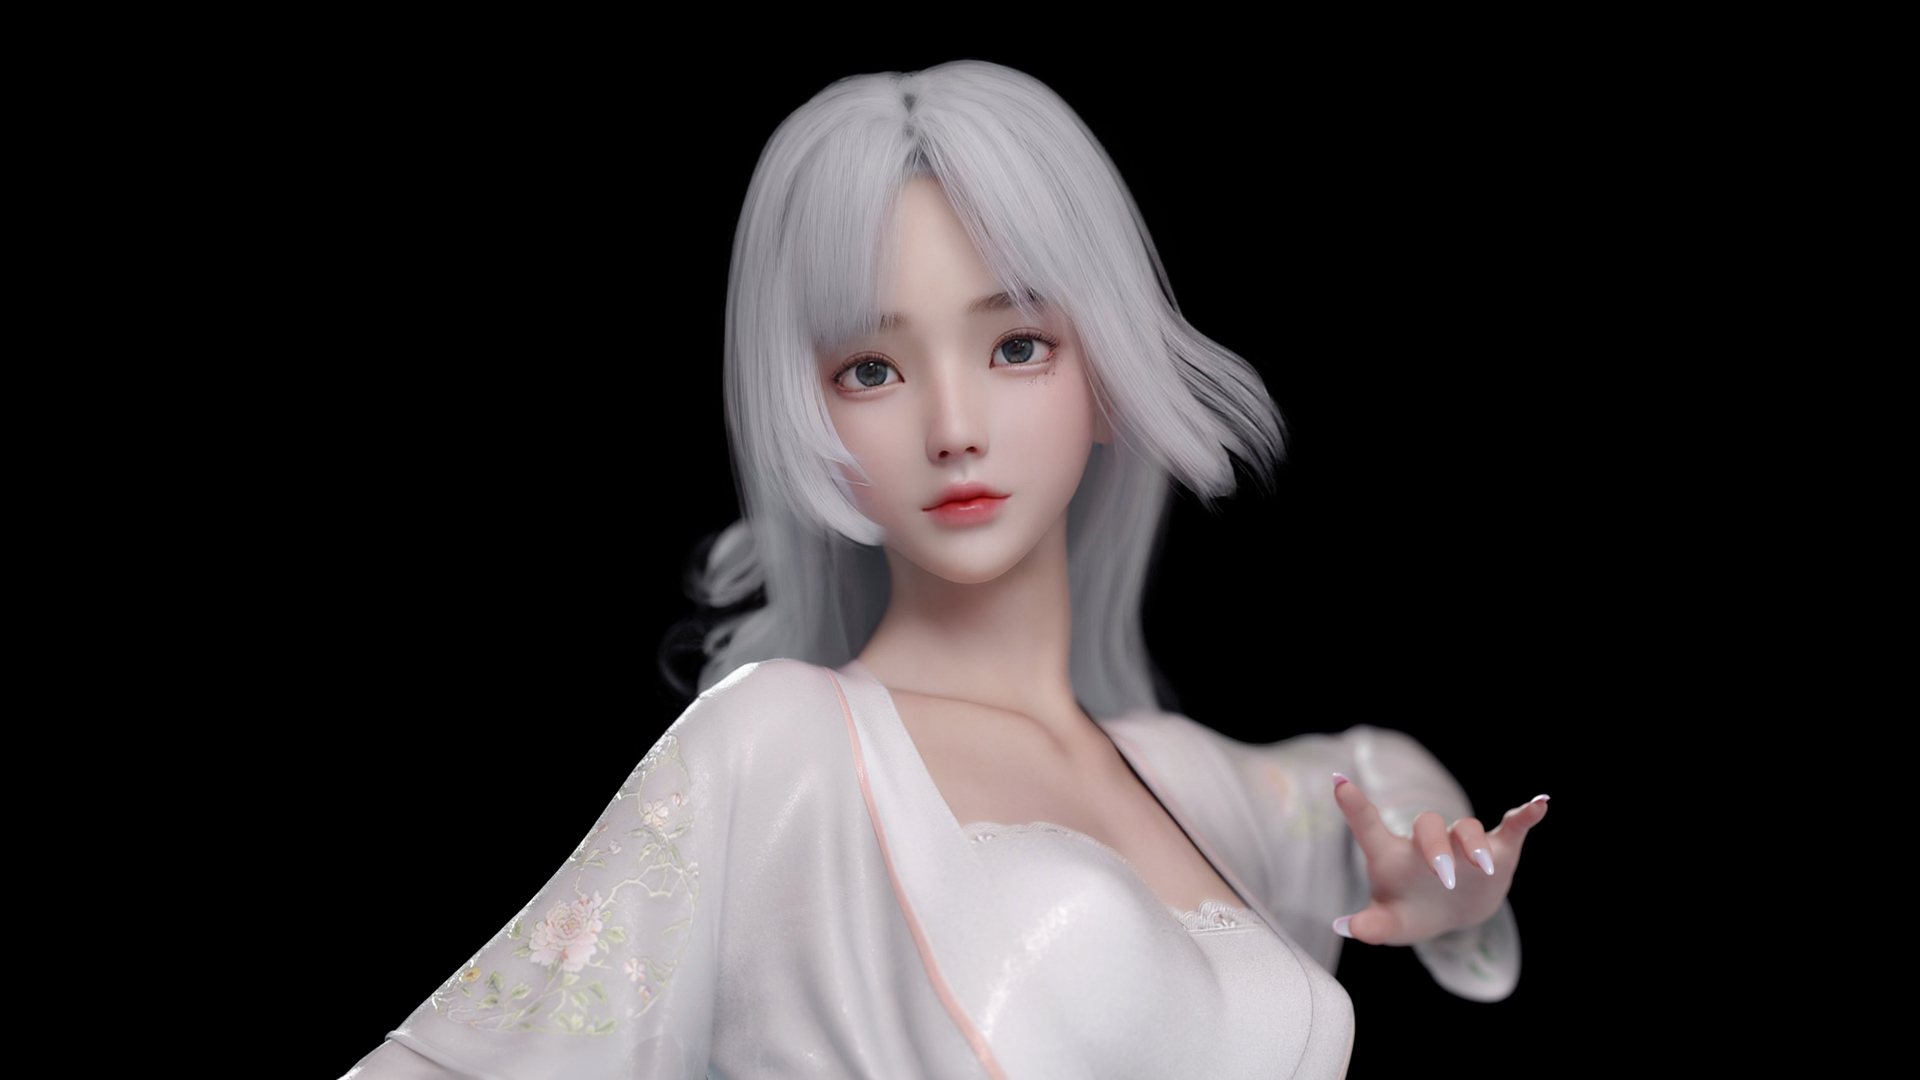 General 1920x1080 CGI black background simple background minimalism white hair women anime looking at viewer portrait painted nails artwork